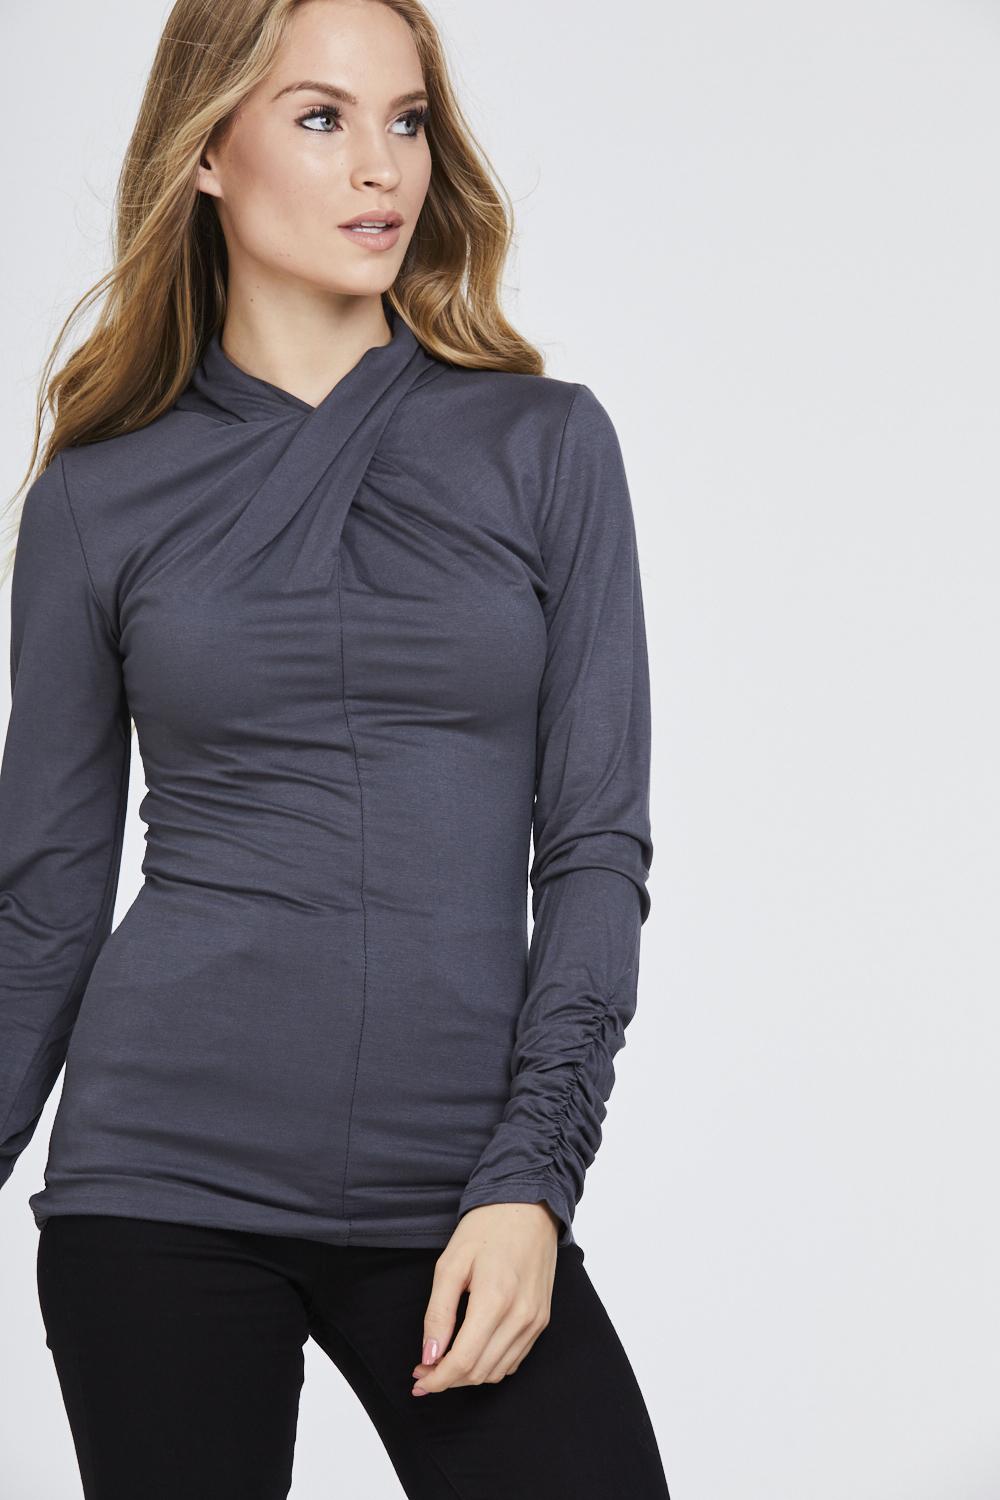 Twisted Neck Top Long Sleeve